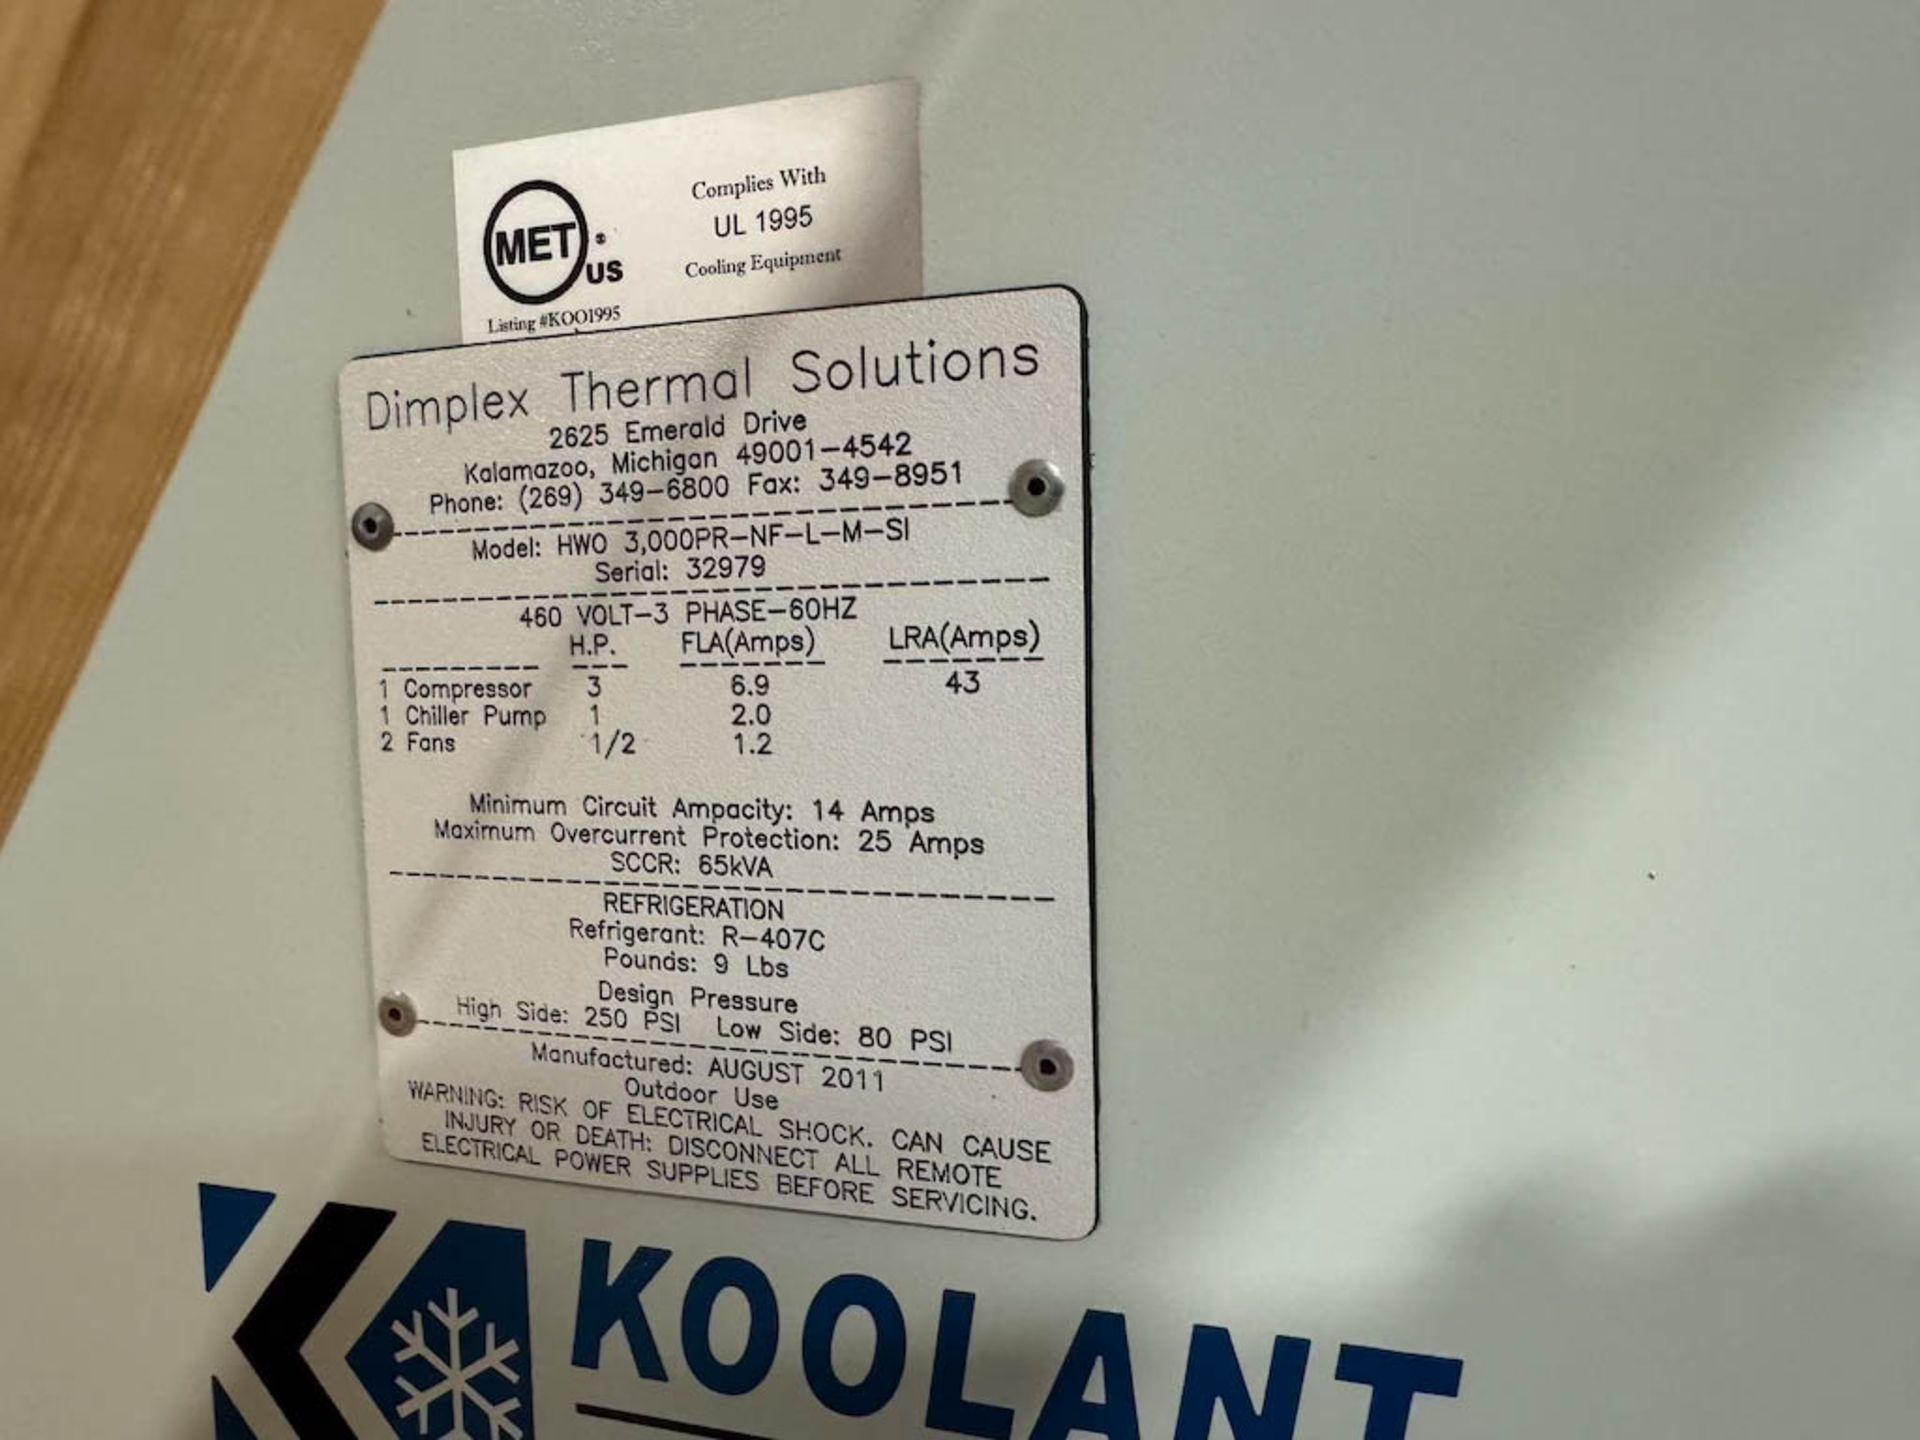 Dimplex Thermal Solutions (Koolant Koolers) Chiller - Image 7 of 7